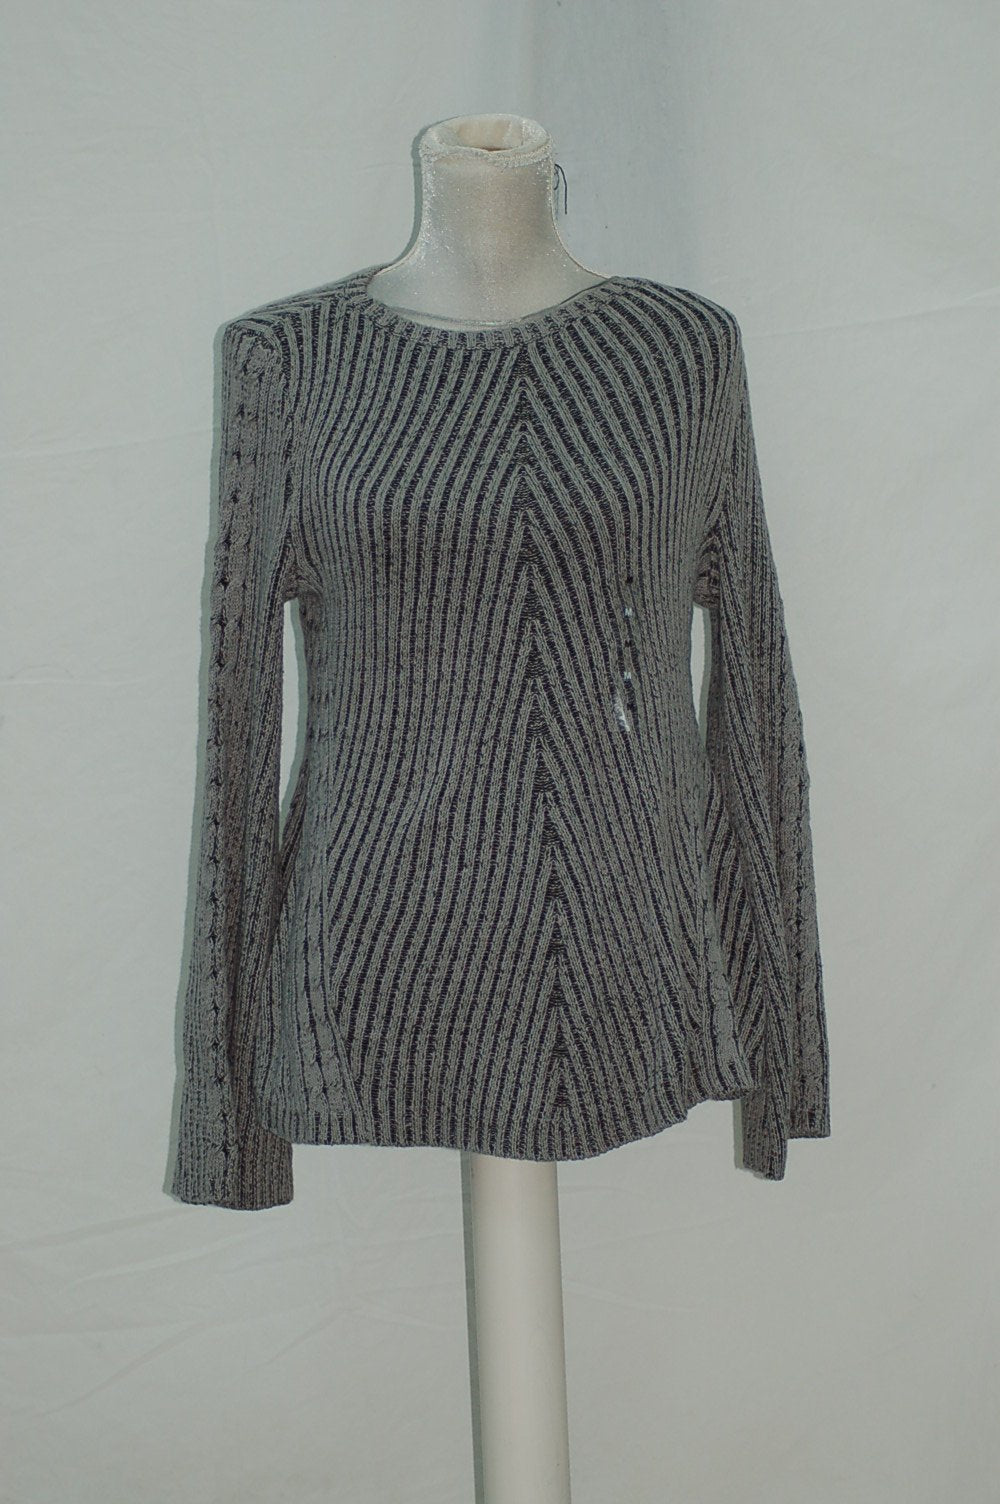 STYLE CO WOMEN'S SWEATER, GRAY, MEDIUM - NEW WITHOUT TAG 4796